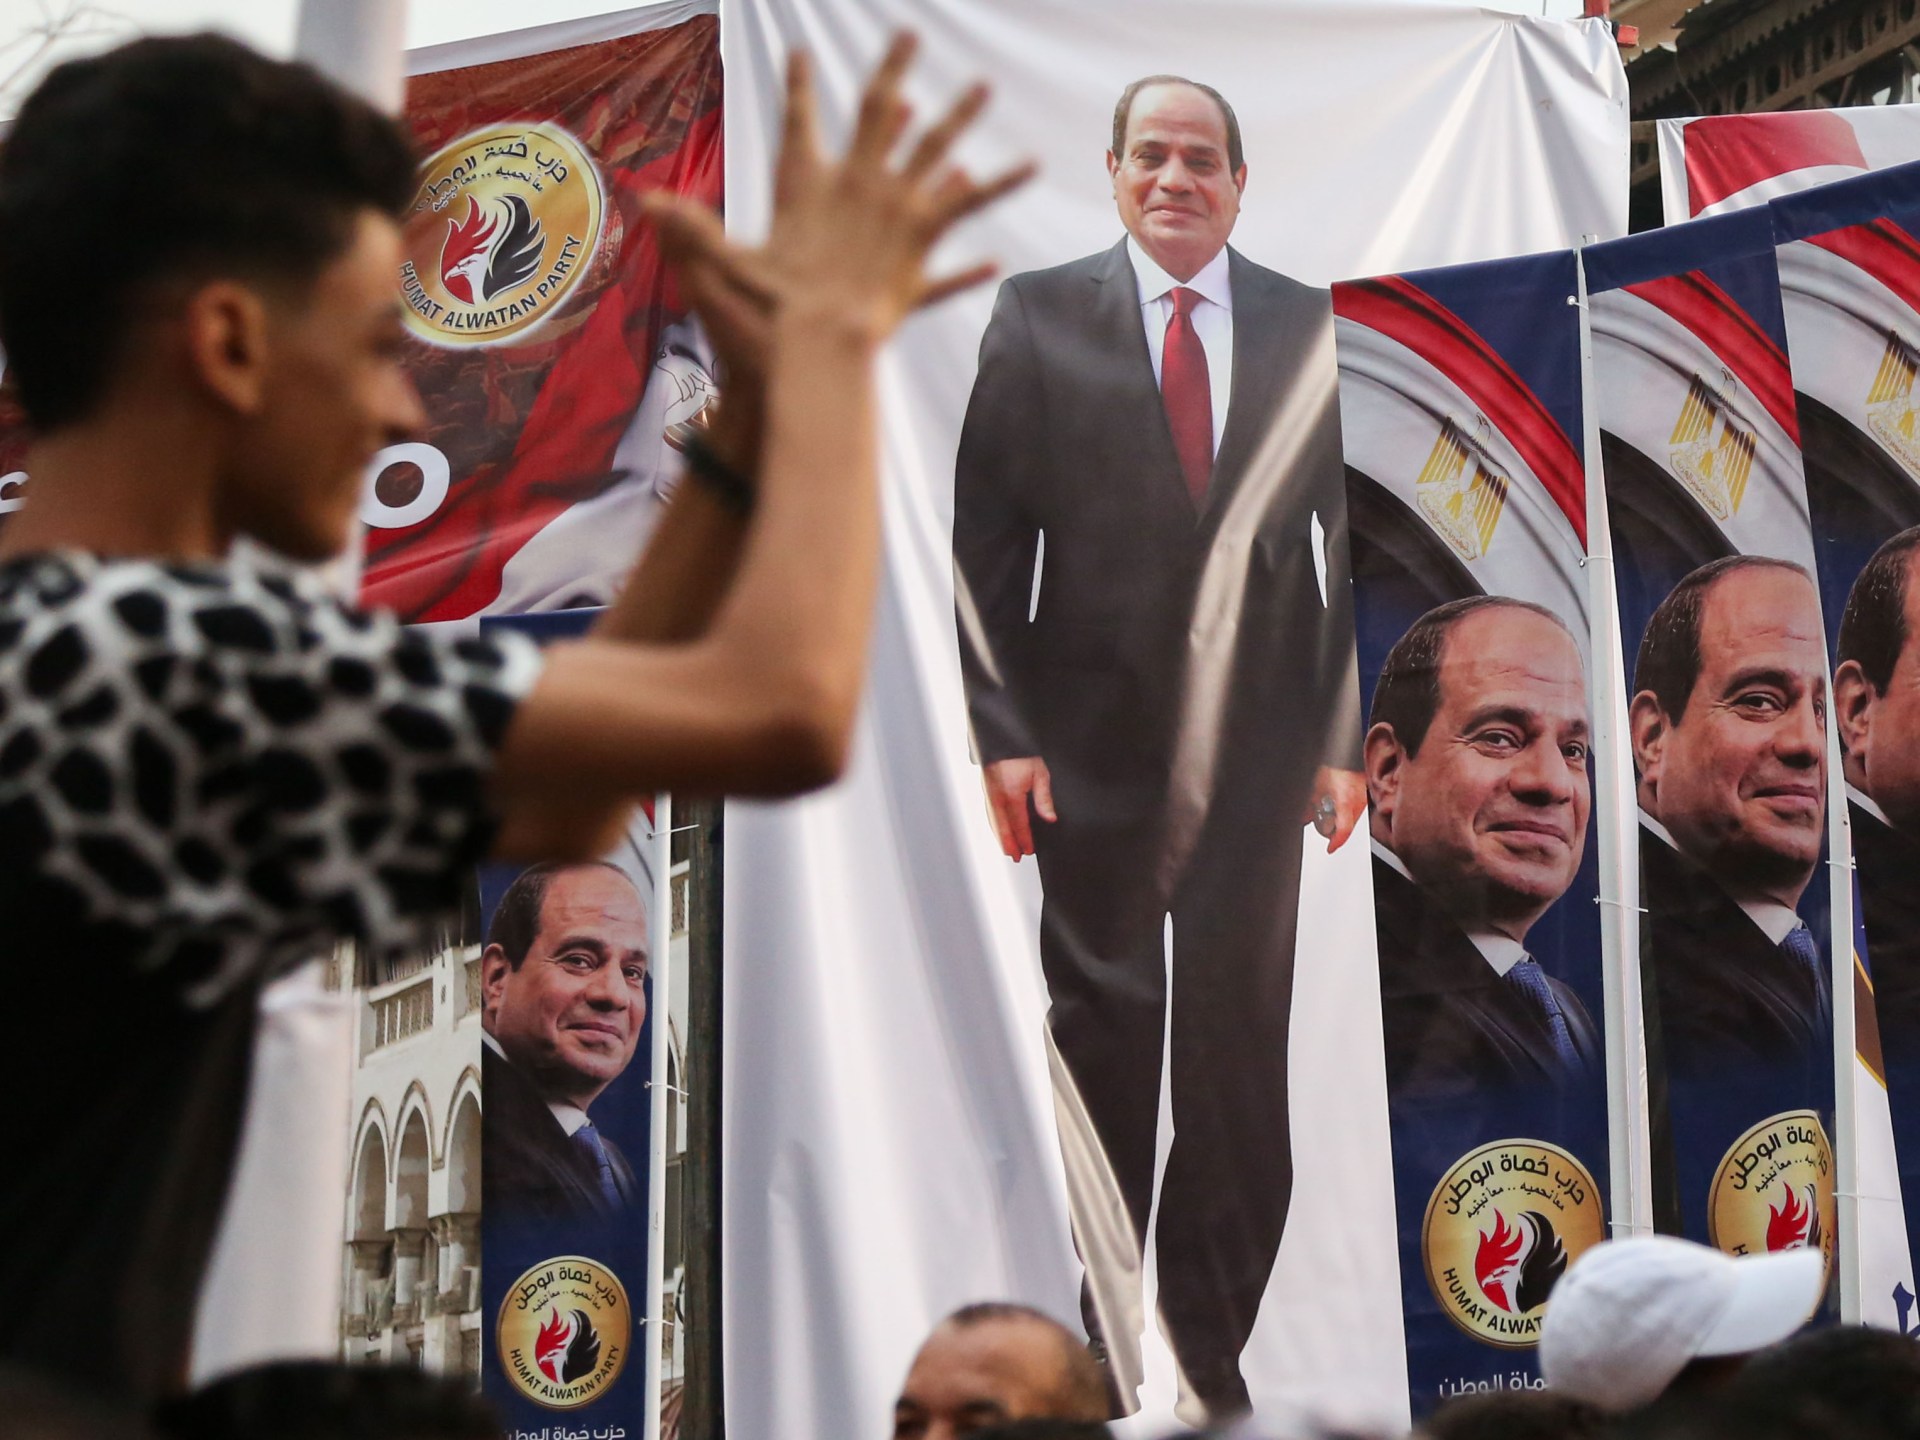 Egypt election: Is President el-Sisi poised to win a third term? | Abdel Fattah el-Sisi